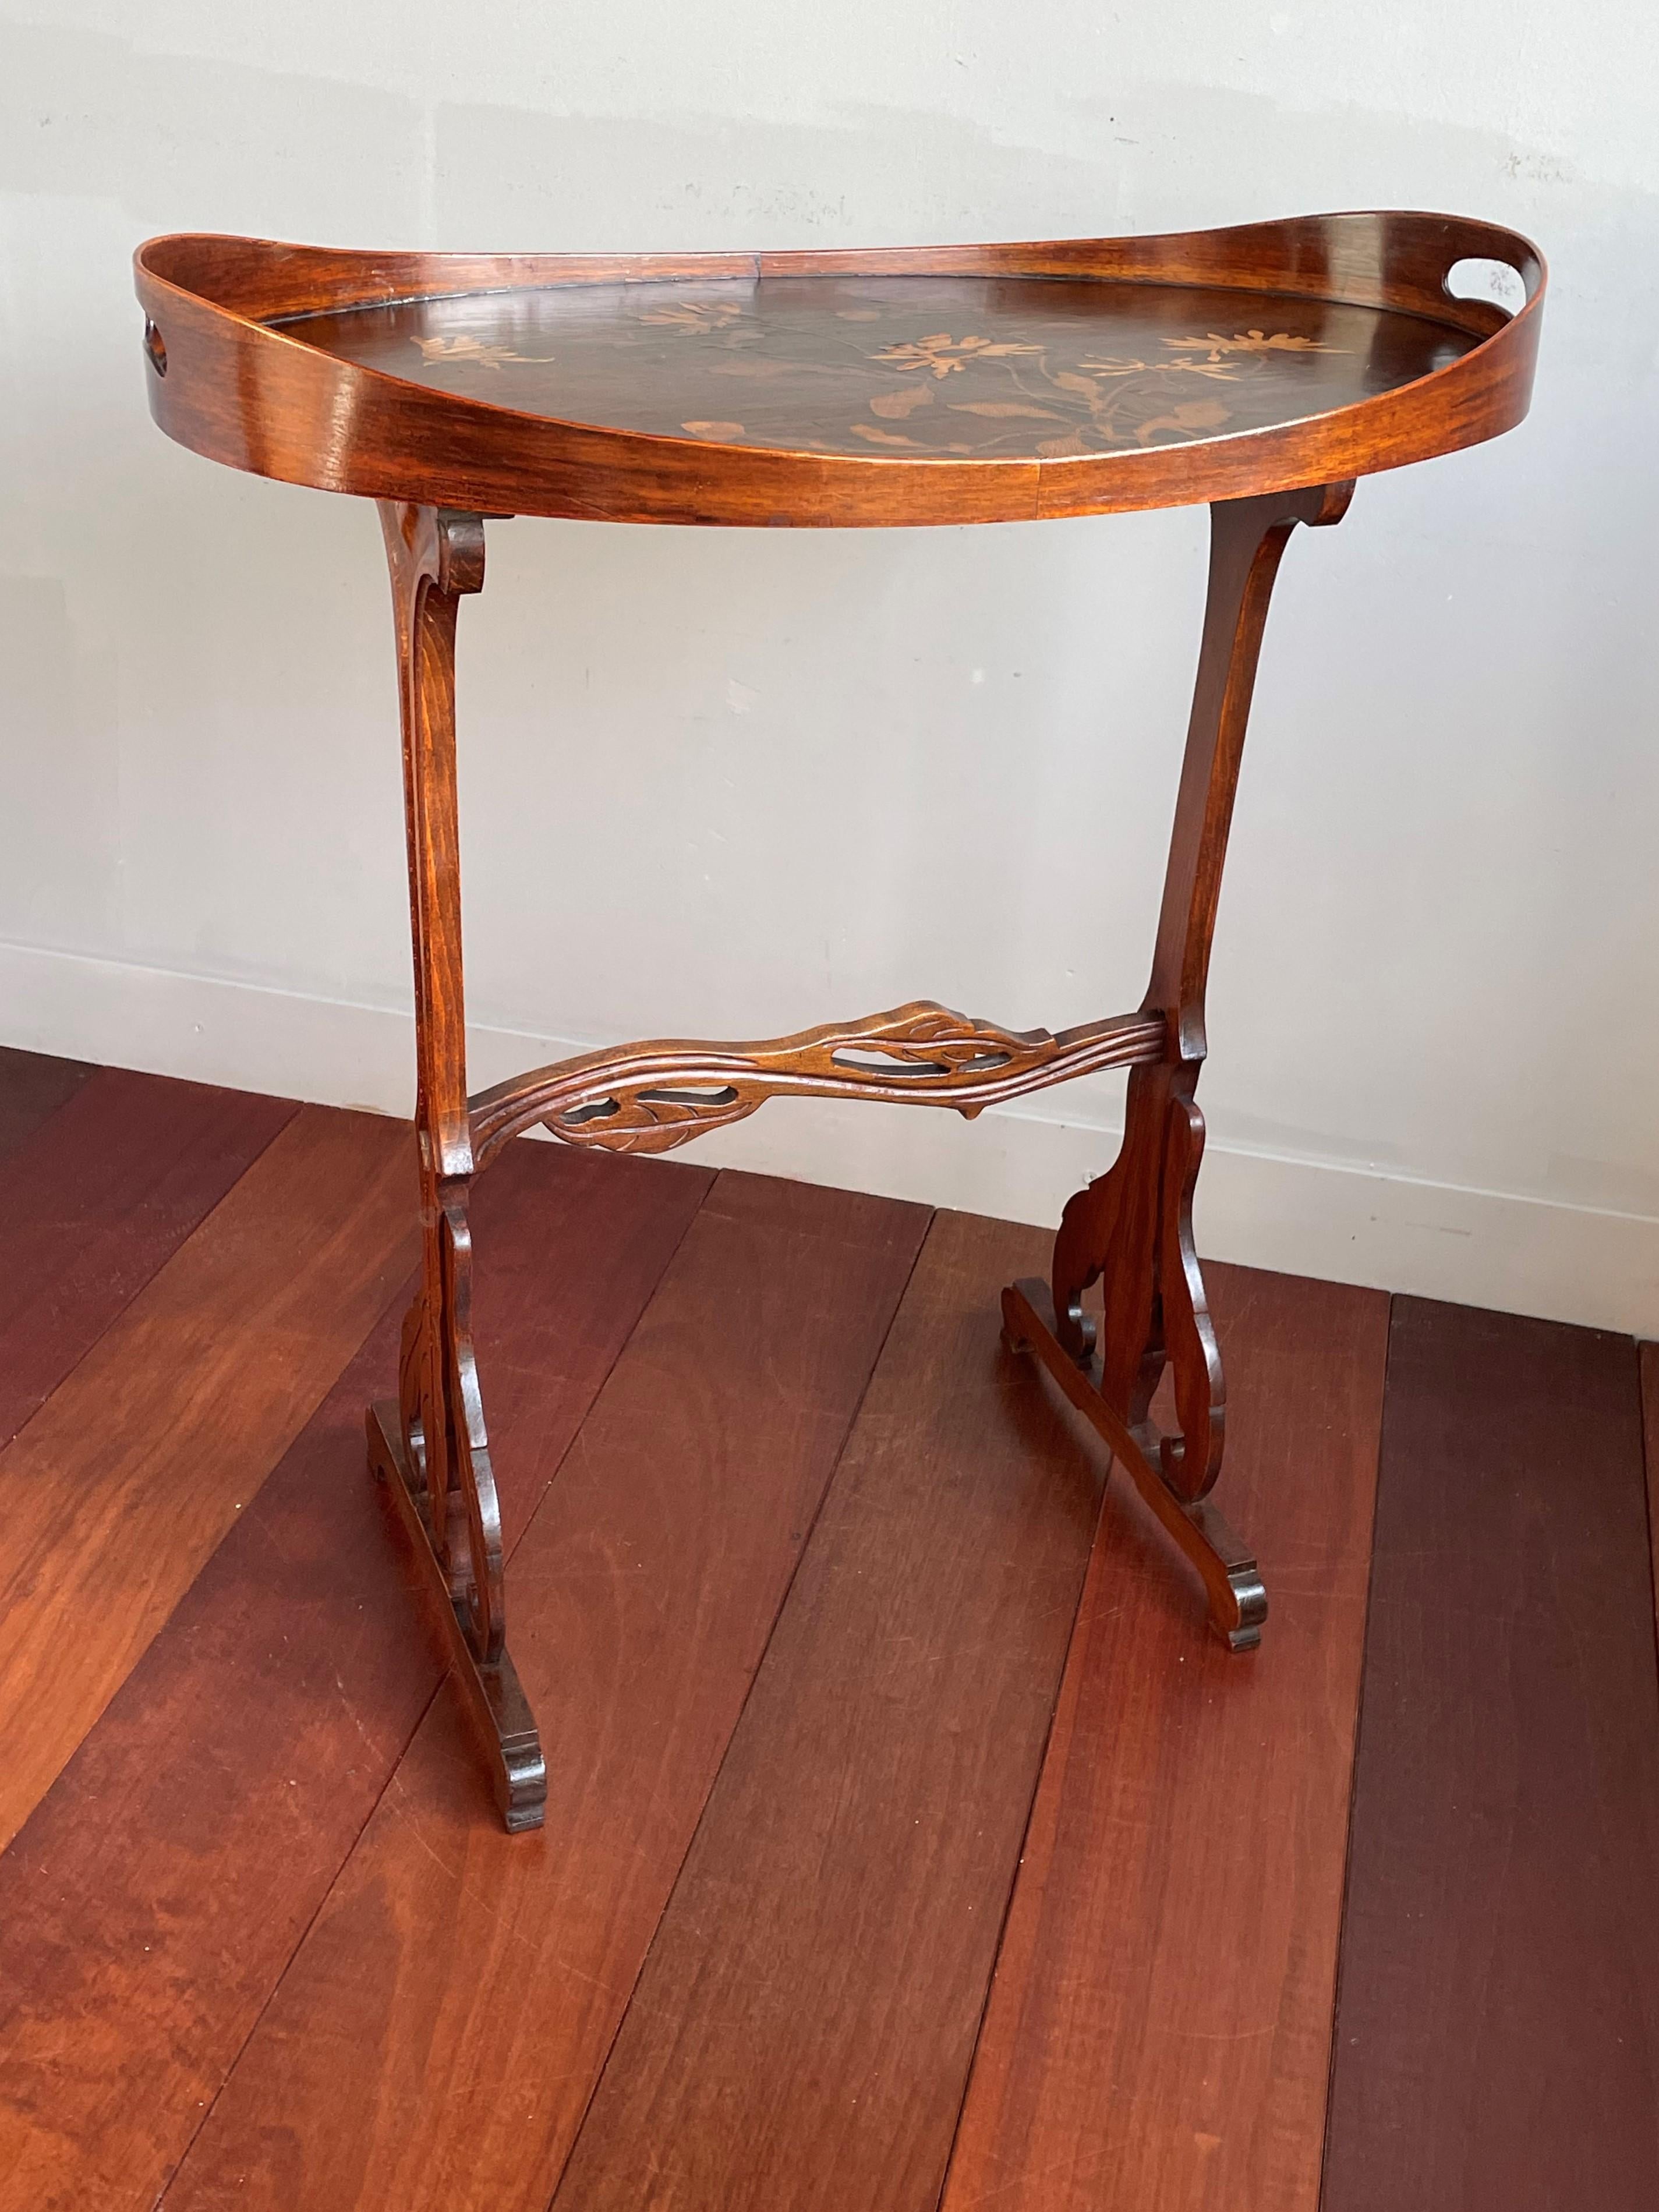 Patinated Emile Gallé Art Nouveau Tray Stand / Serving Table with Inlaid Flowers 1895-1903 For Sale